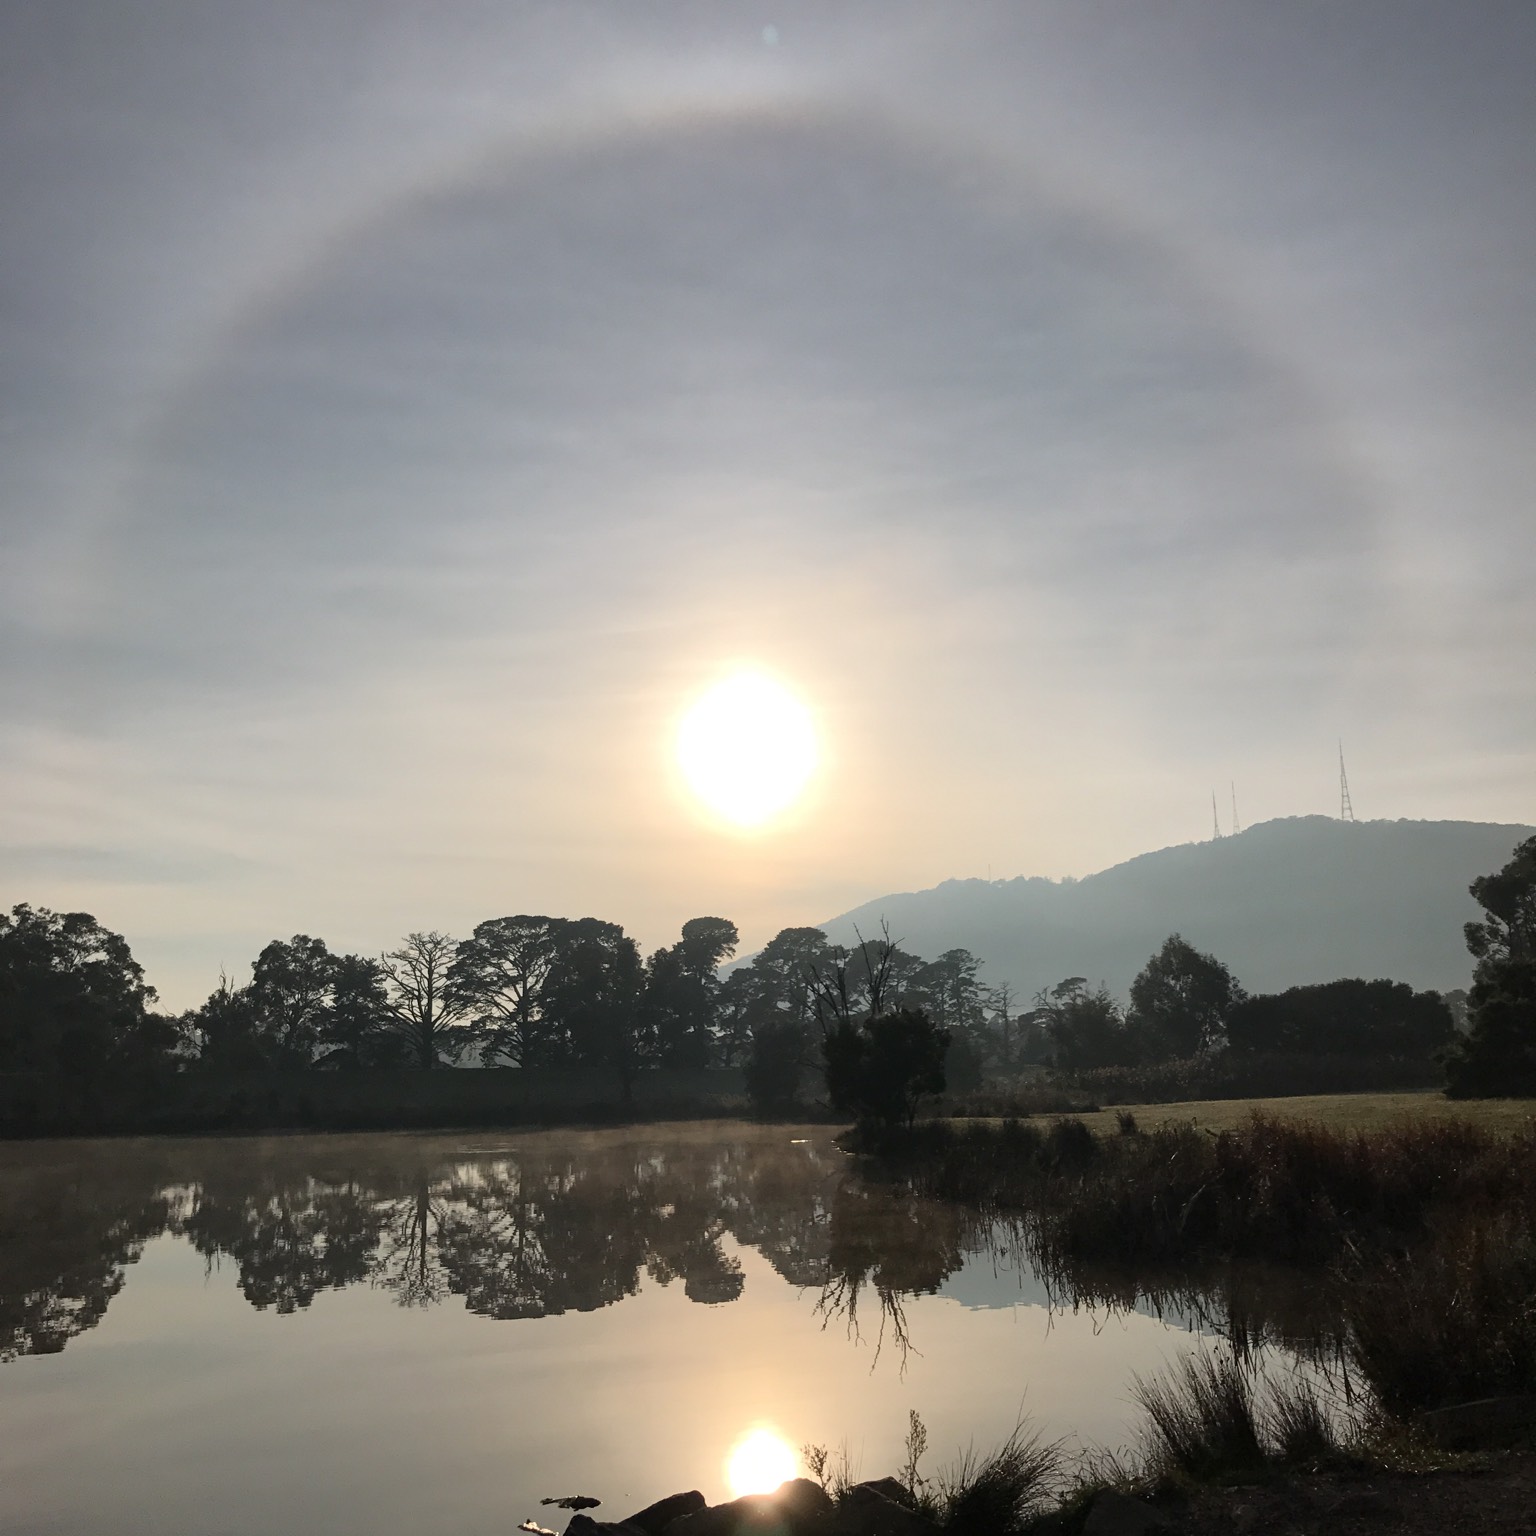 What causes the halo around the sun? - Quora